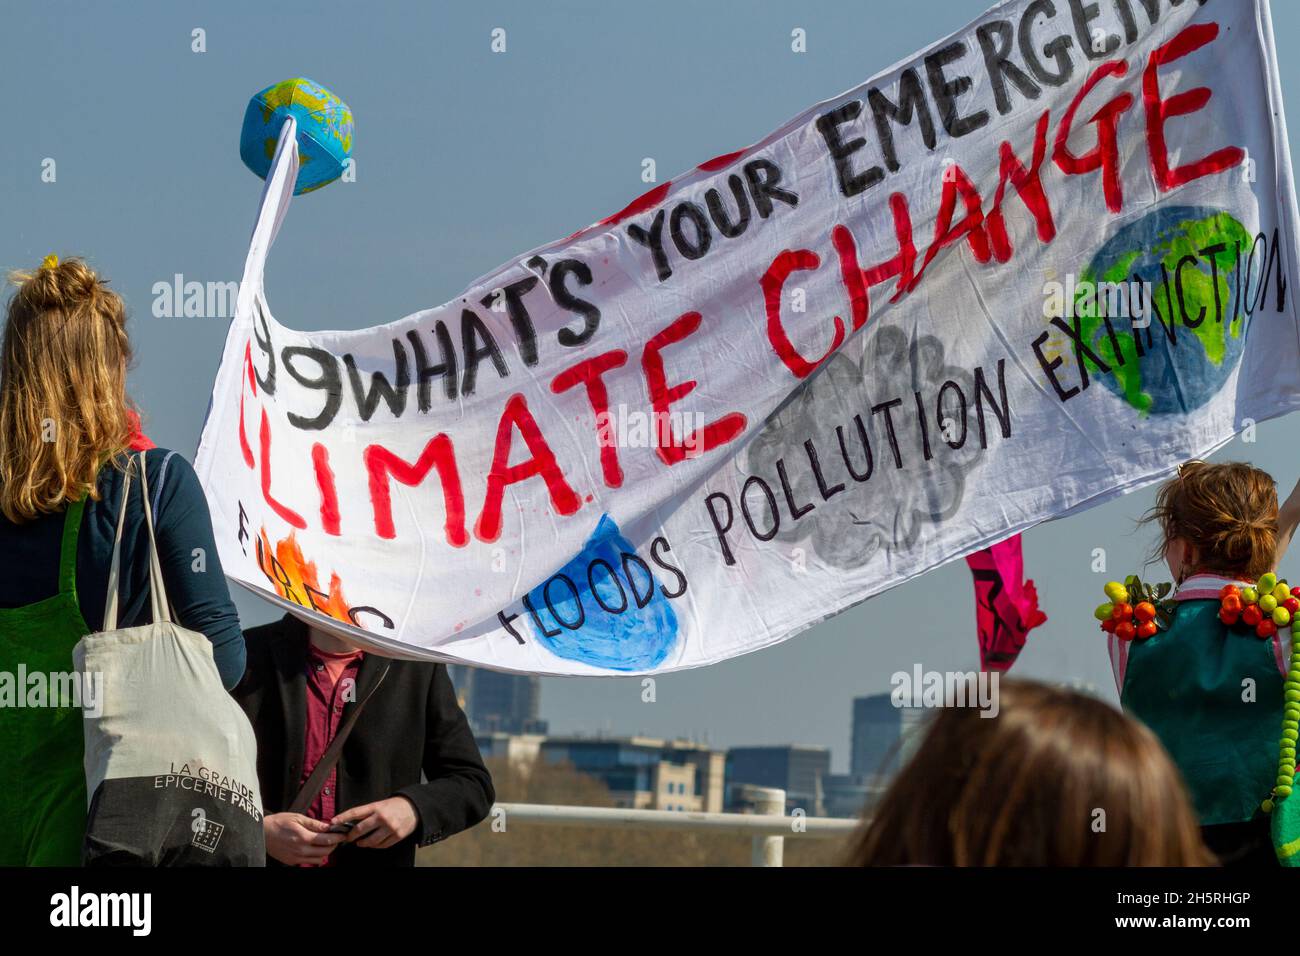 Street photograph of a group of climate change demonstrators with large homemade banner with backs to the camera.  Some buildings can be seen behind. Stock Photo